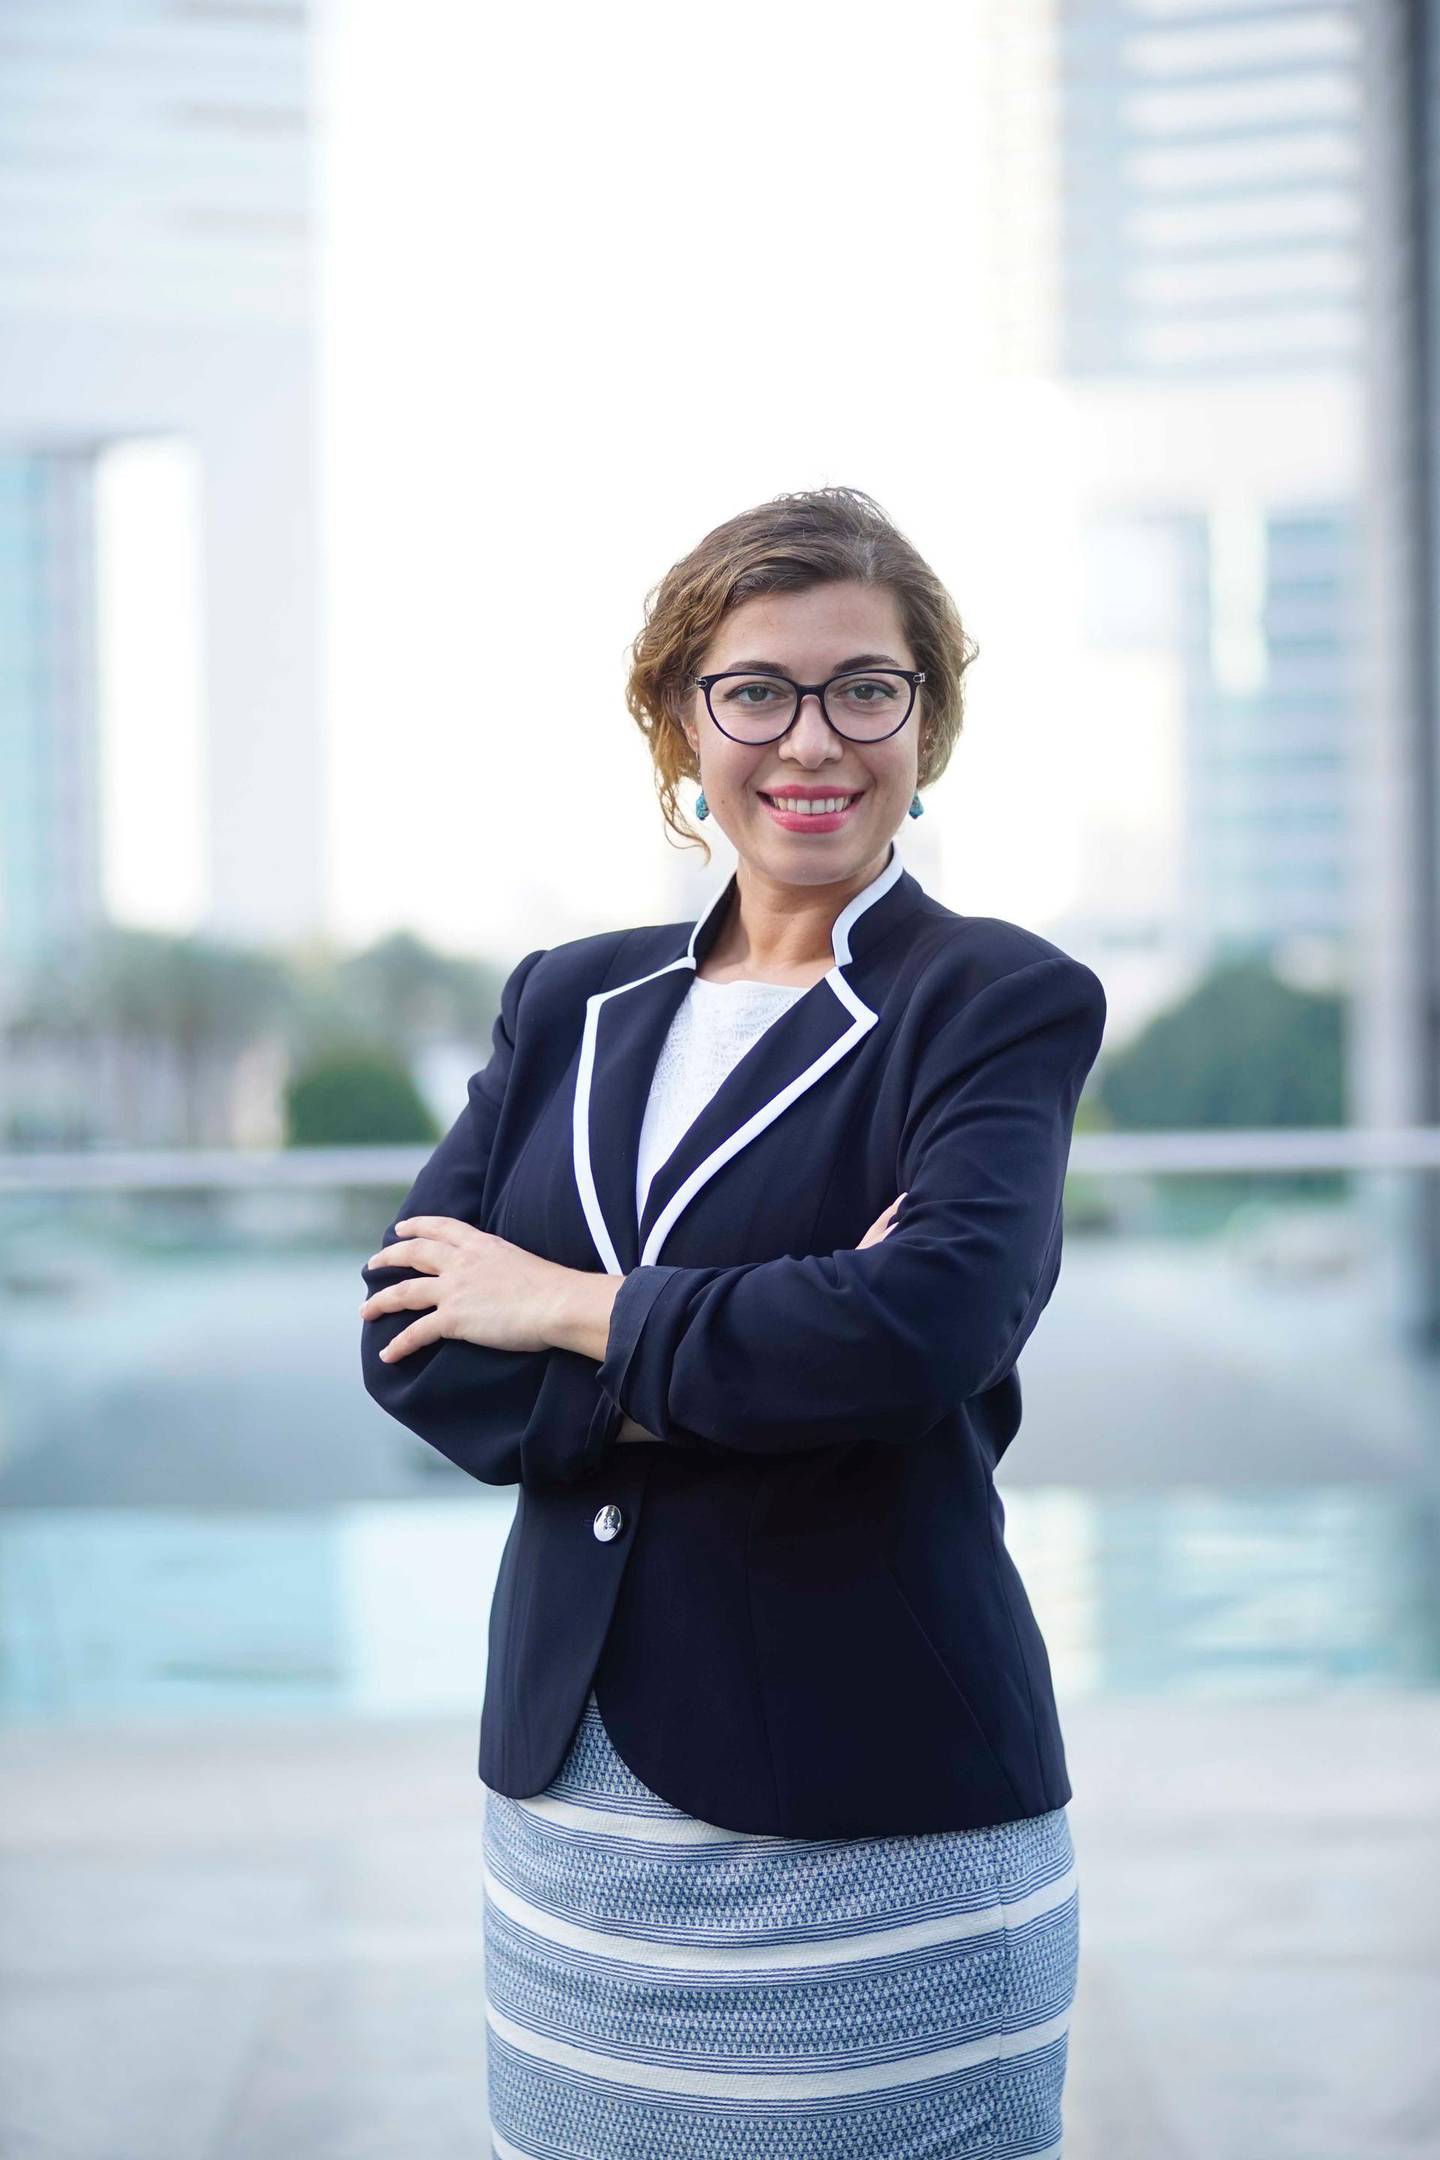 Mihaela Cornelia Moldoveanuis, head of LegalTech at Burj Financial and head of advisory at The Metis Institute, says the recent changes to th UAE inheritance law will help create a level playing field for investors with assets throughout the UAE. Photo courtesy Burj Financial